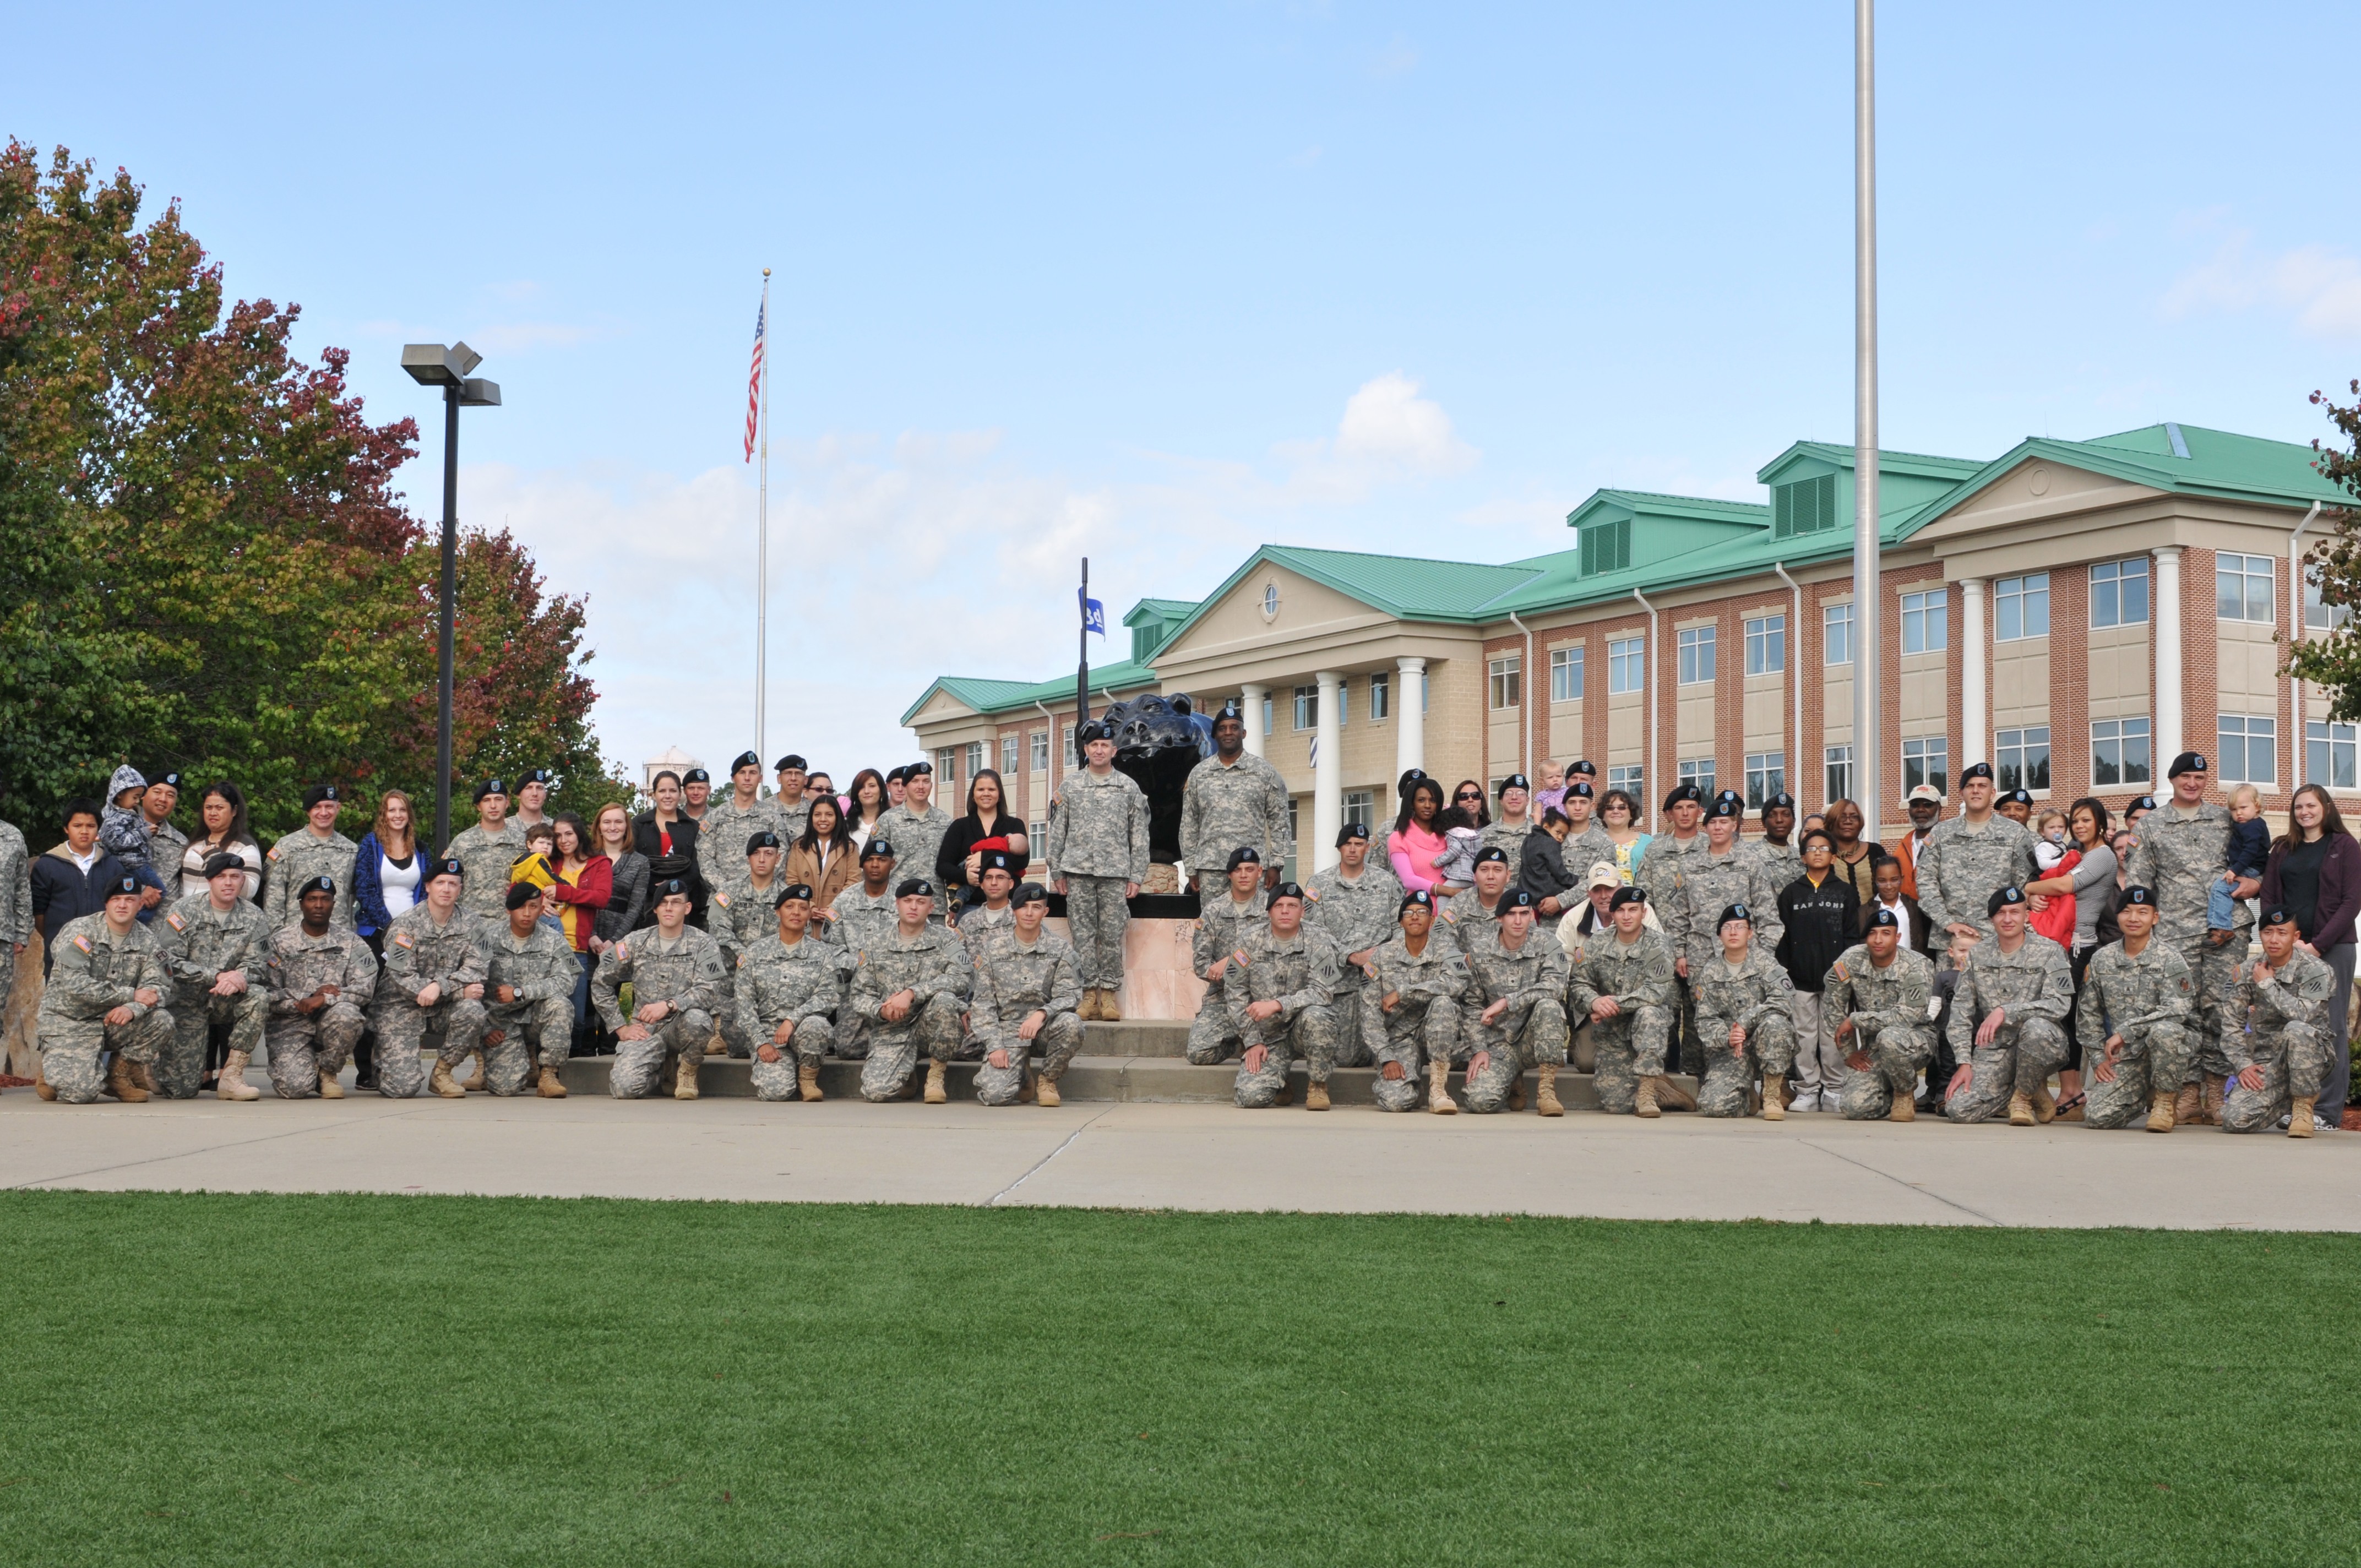 Marne Division hosts 'mass re-enlistment' ceremony | Article | The United States Army